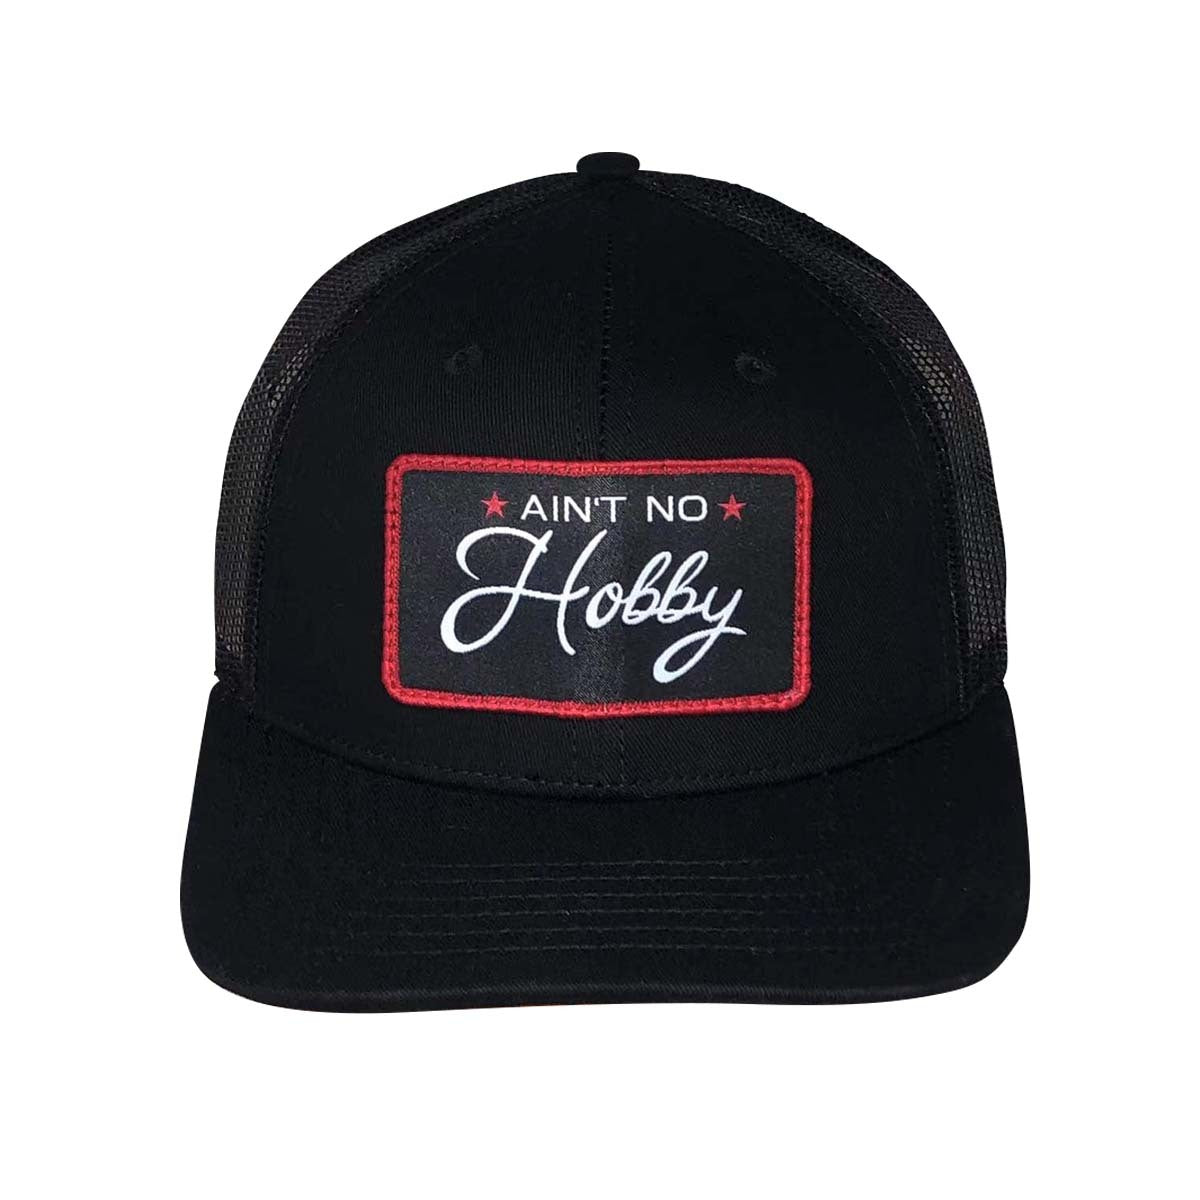 Barstool Golf Ain't No Hobby Patch Trucker Hat-Hats-Fore Play-Black-One Size-Barstool Sports